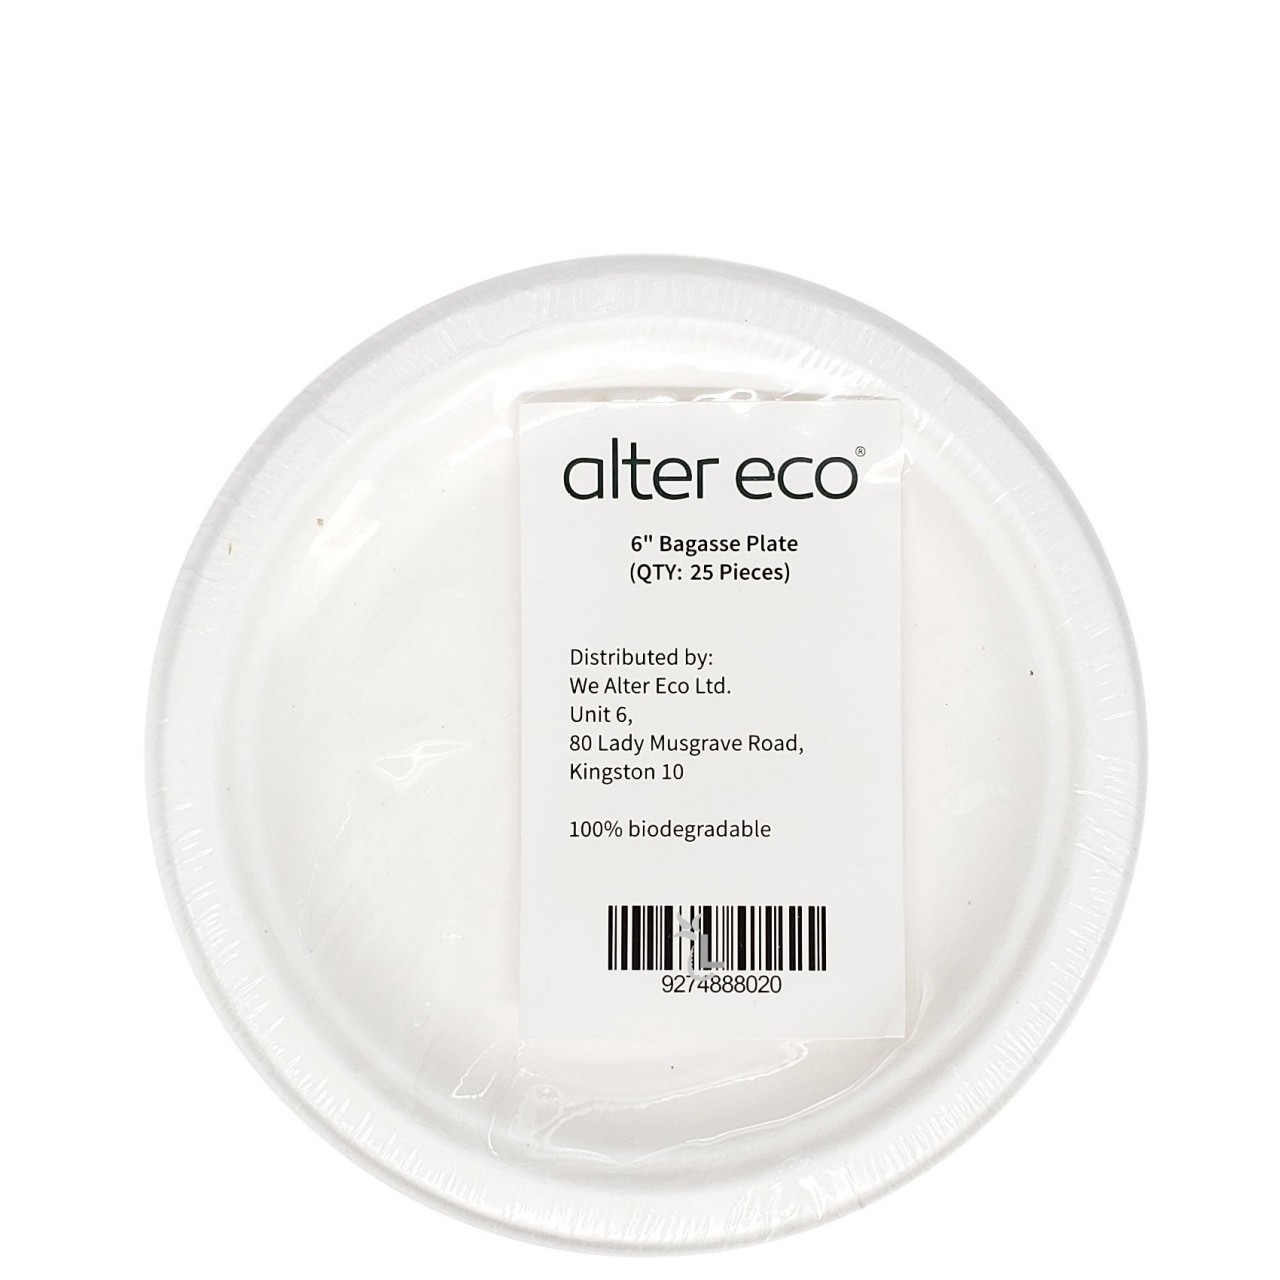 ALTER ECO BAGASSE PLATE ROUND 25x6in